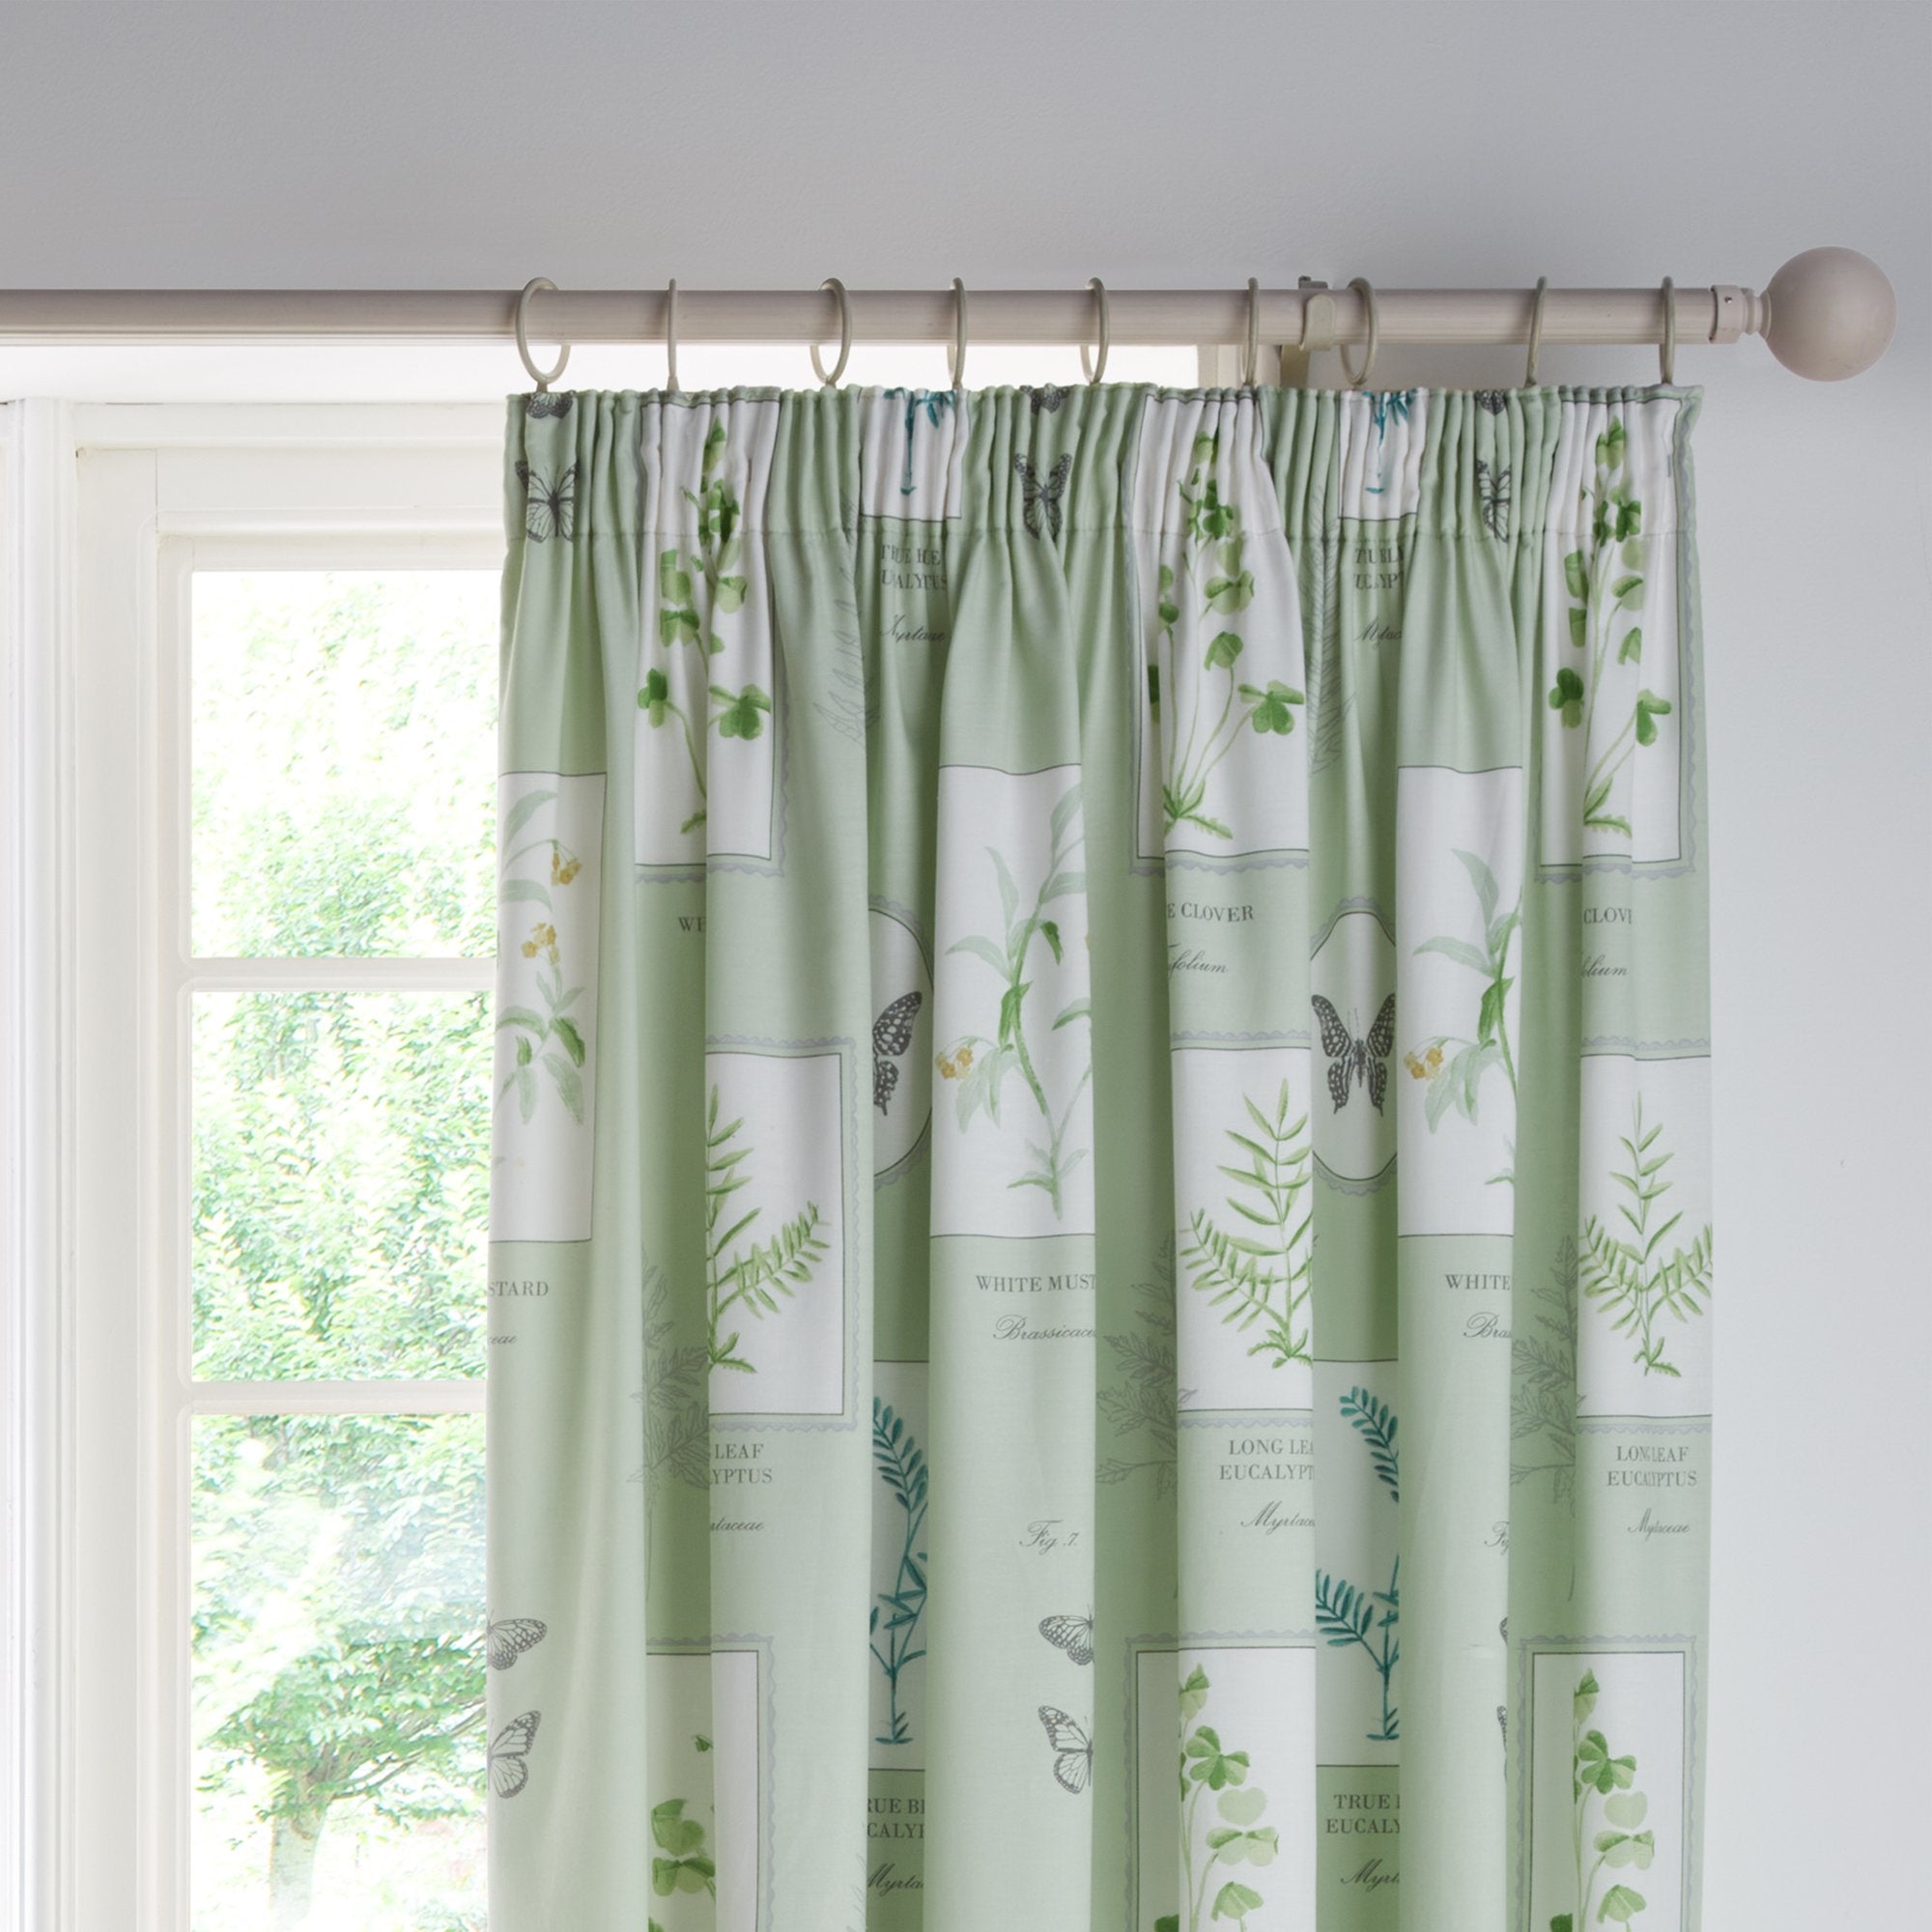 Pair of Pencil Pleat Curtains With Tie-Backs Floral Garden by Dreams & Drapes Design in Green